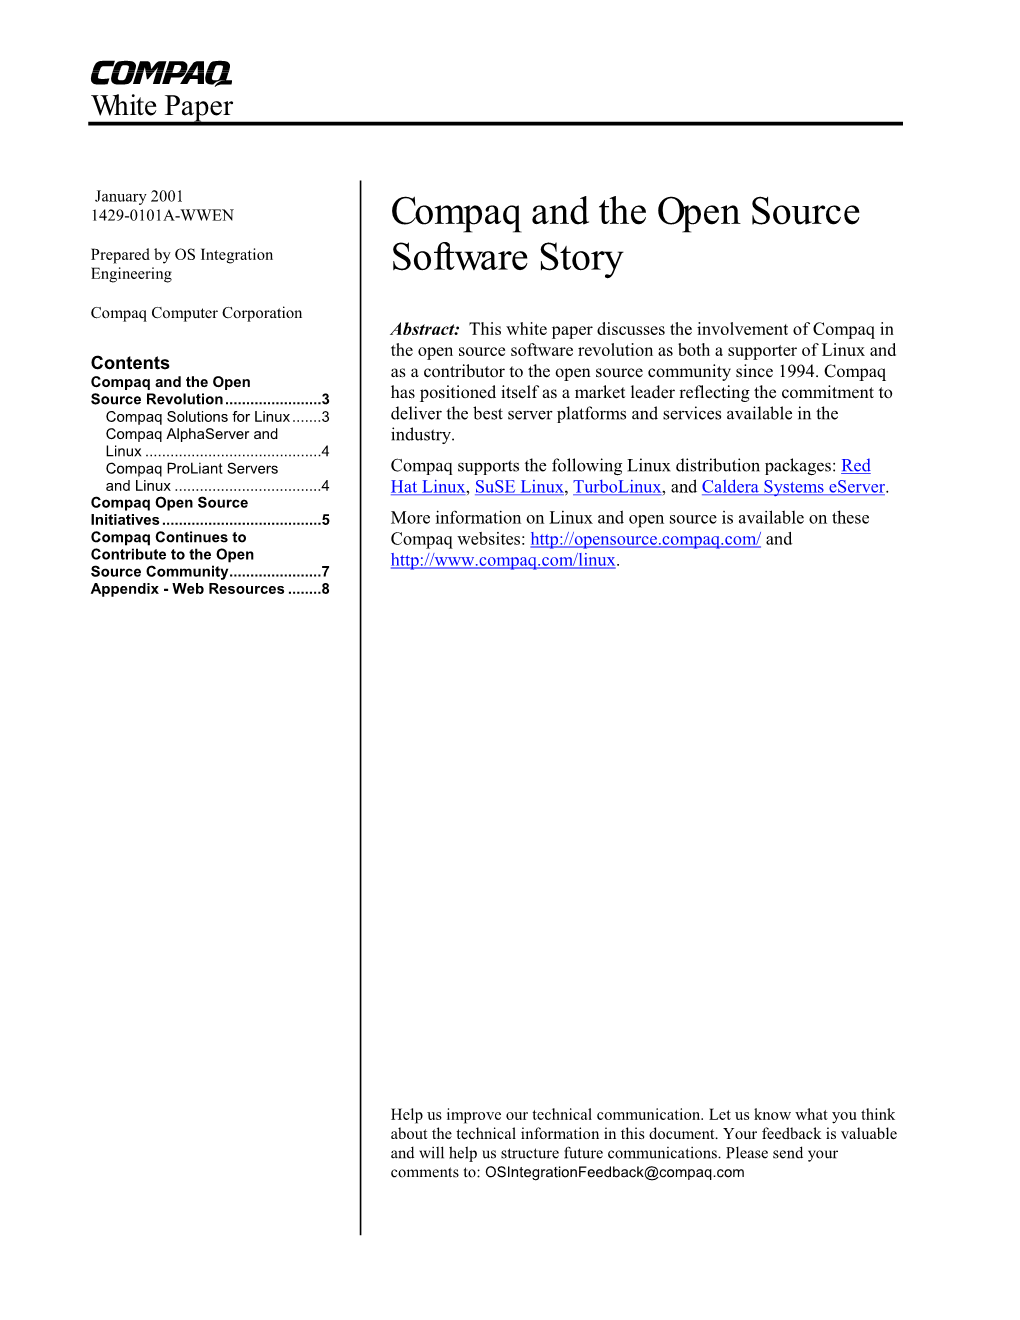 Compaq and the Open Source Software Story 2